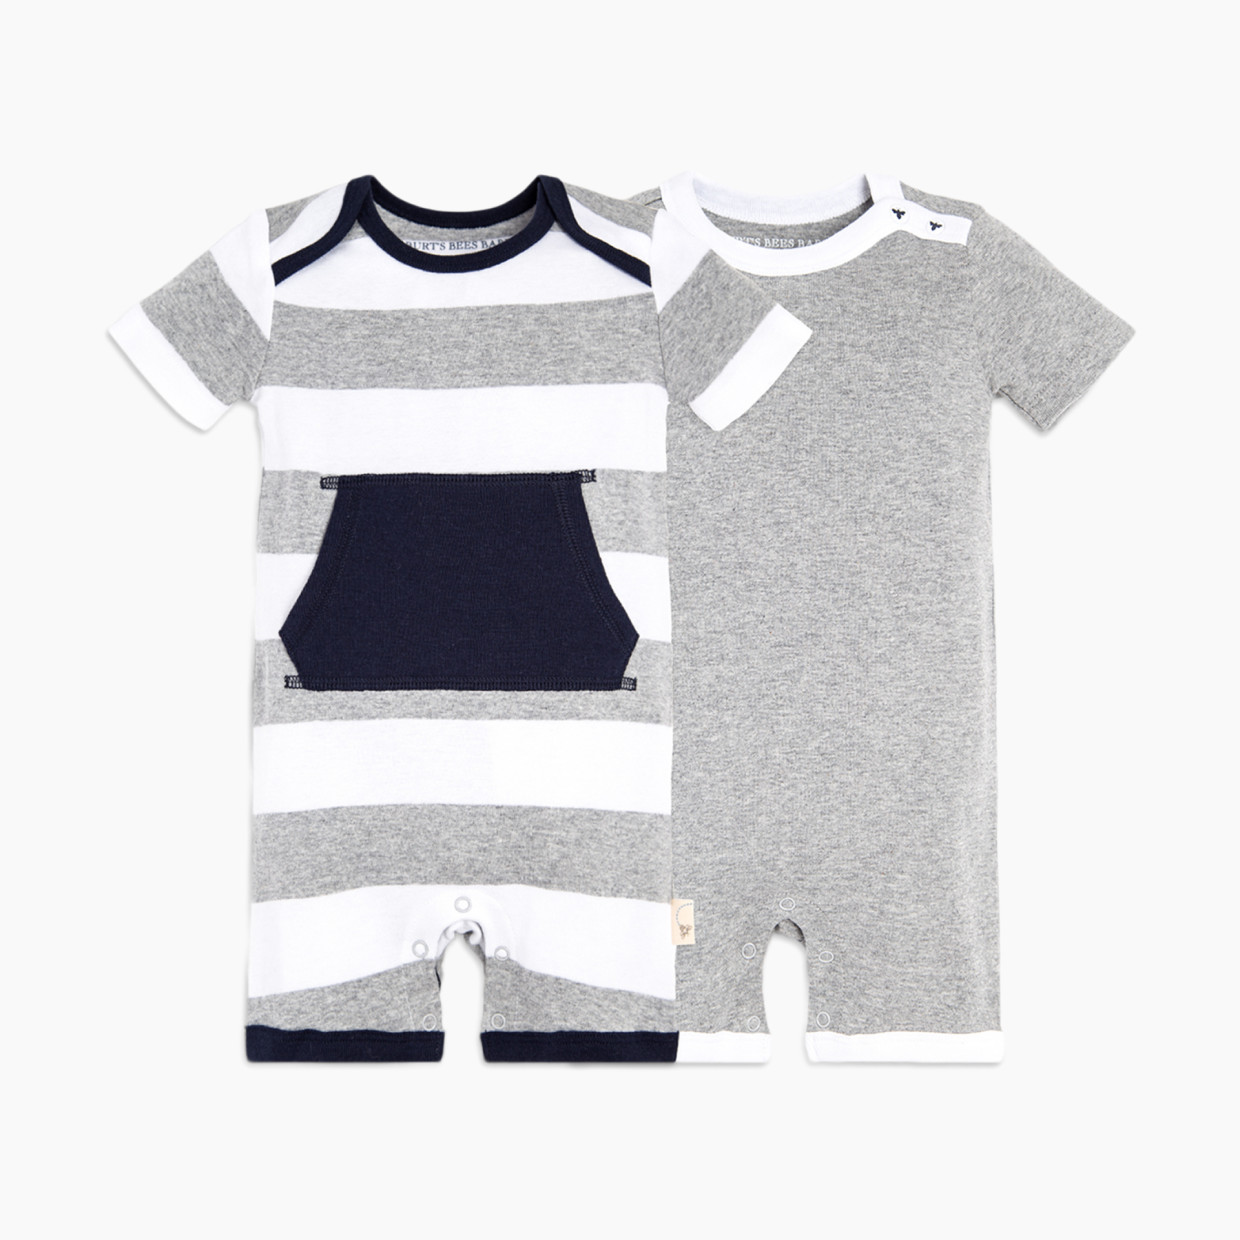 Burt's Bees Baby 2 Pack Rompers - Heather Grey Pocket, 3-6 Months.